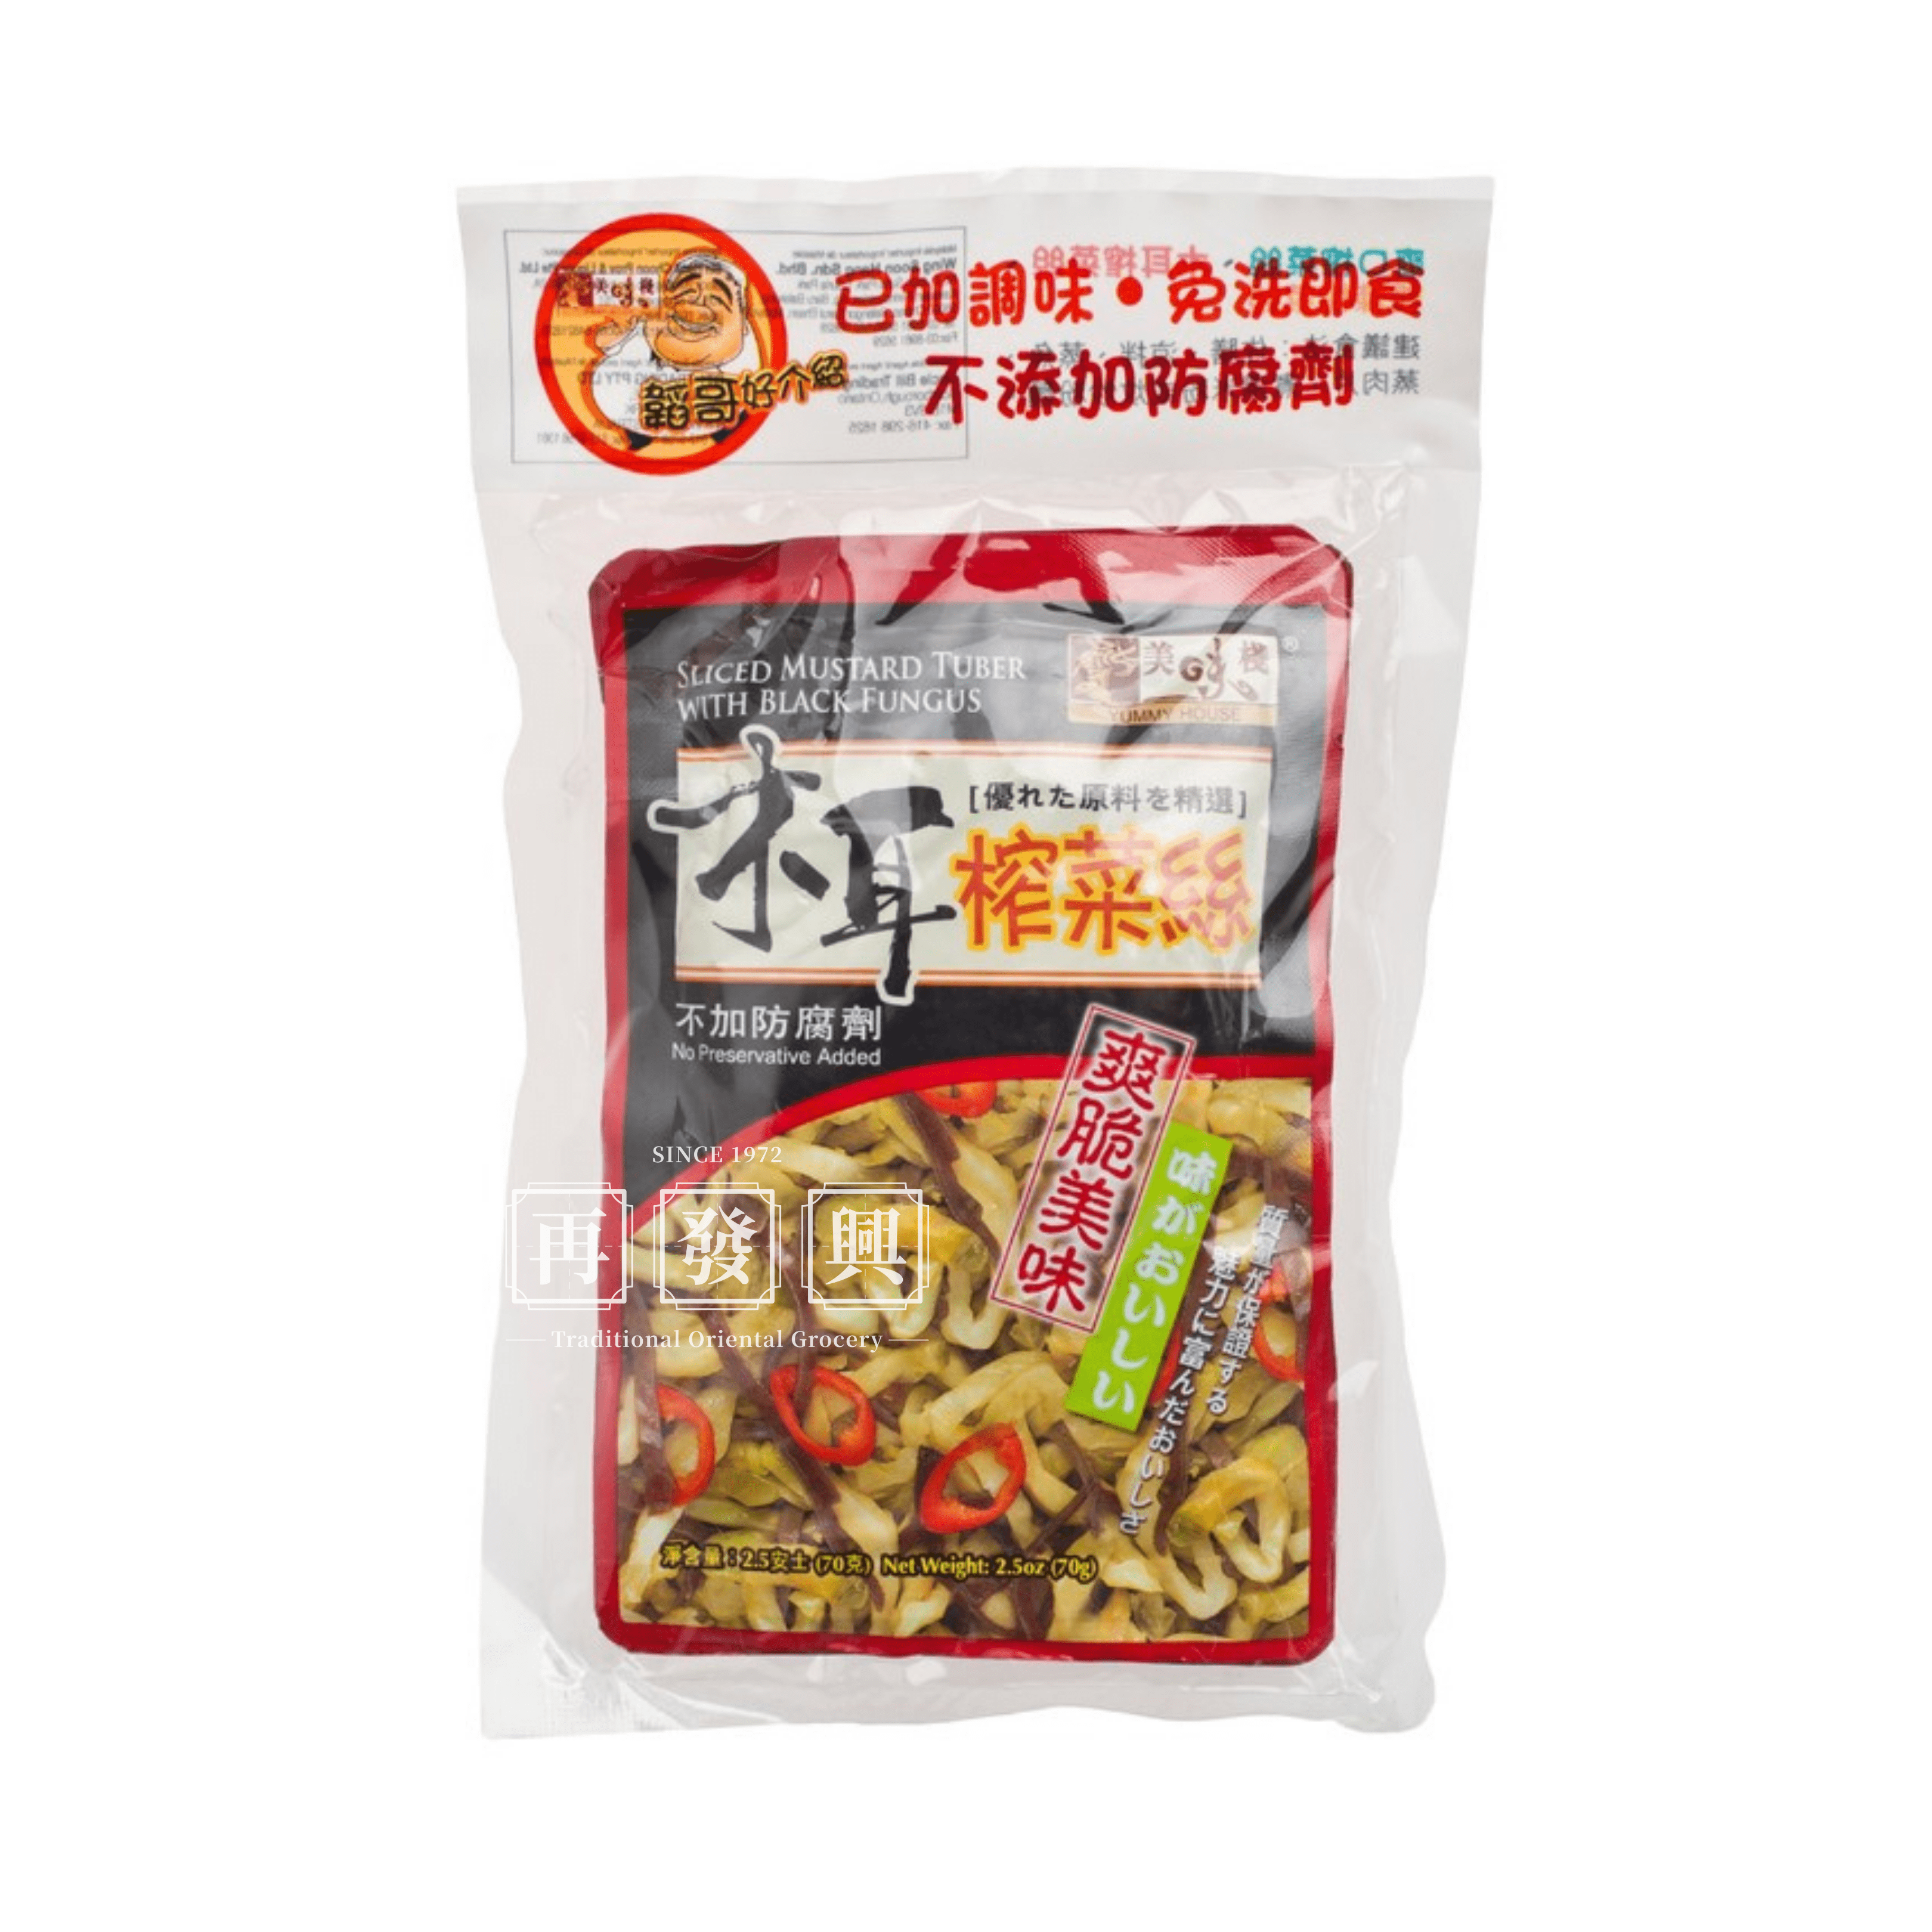 Yummy House 3 in 1 Sliced Mustard Tuber with Black Fungus